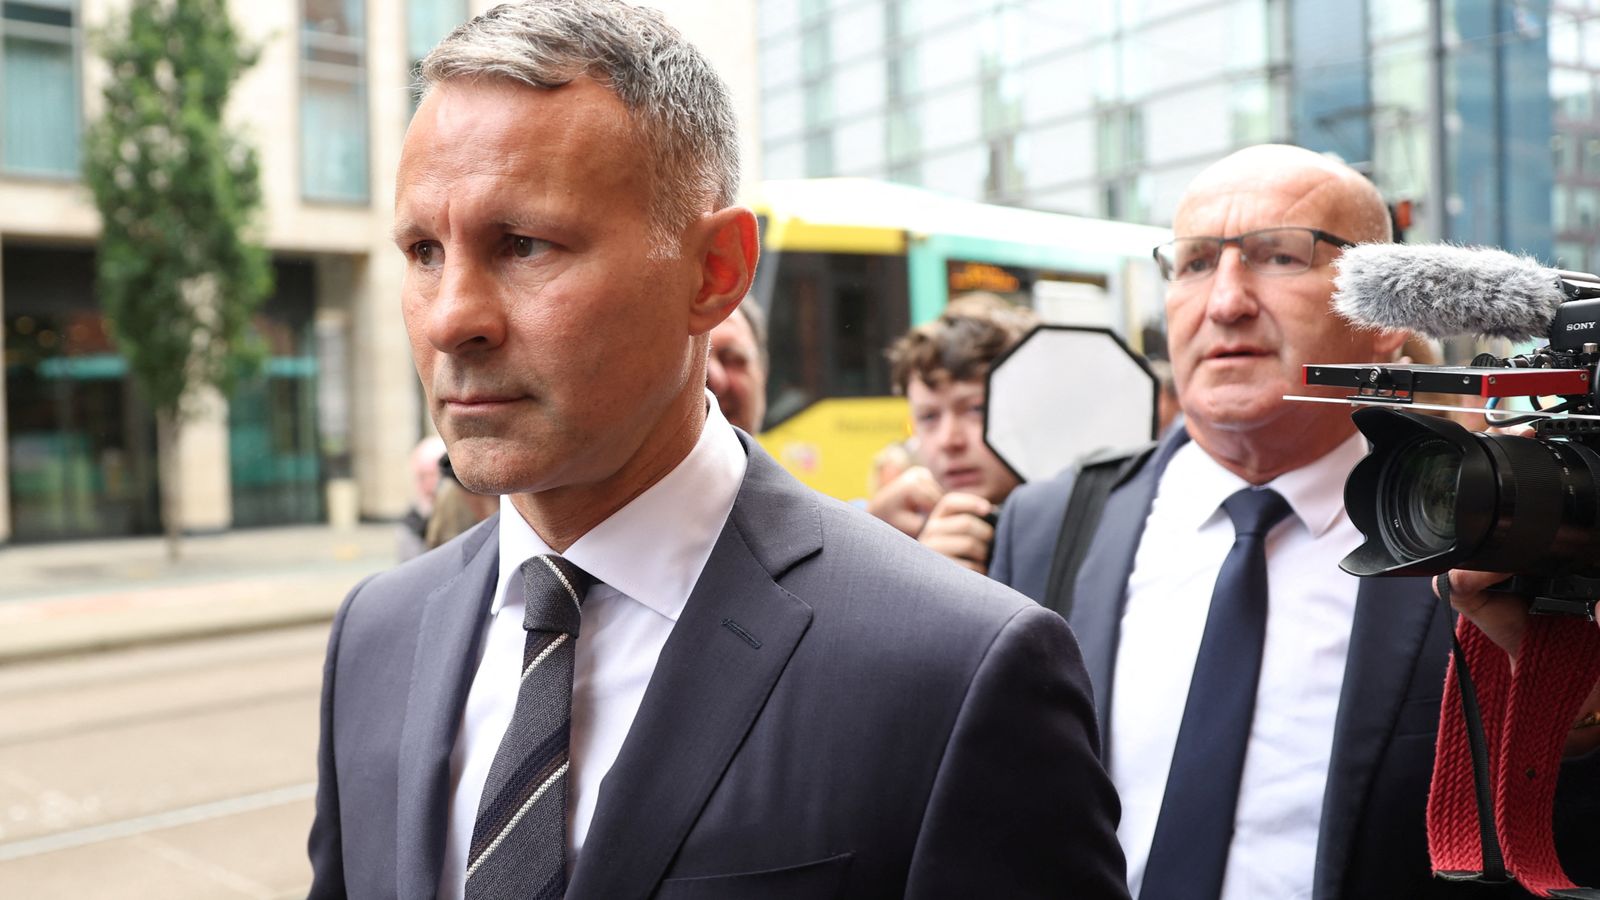 Ryan Giggs trial: 'Sinister' former Manchester United star 'deliberately headbut..